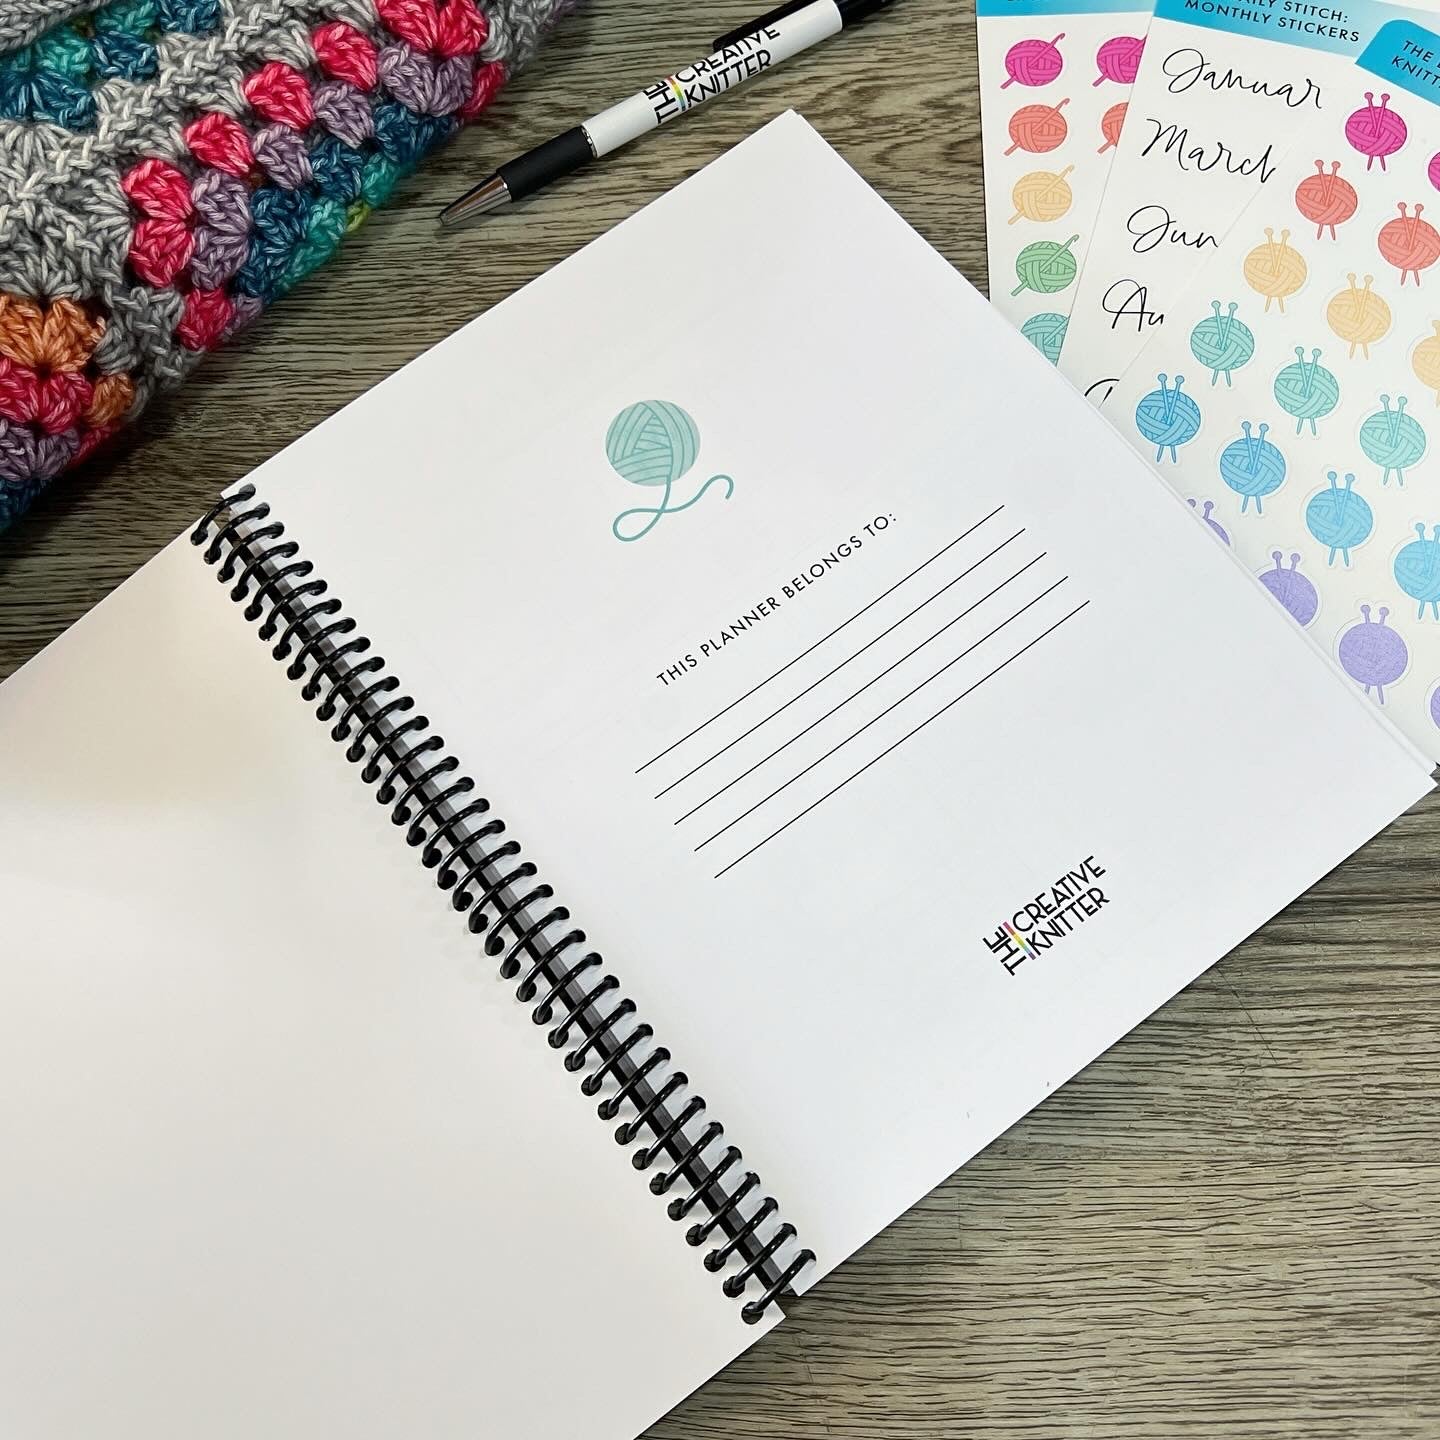 The Daily Stitch Planner Bundle